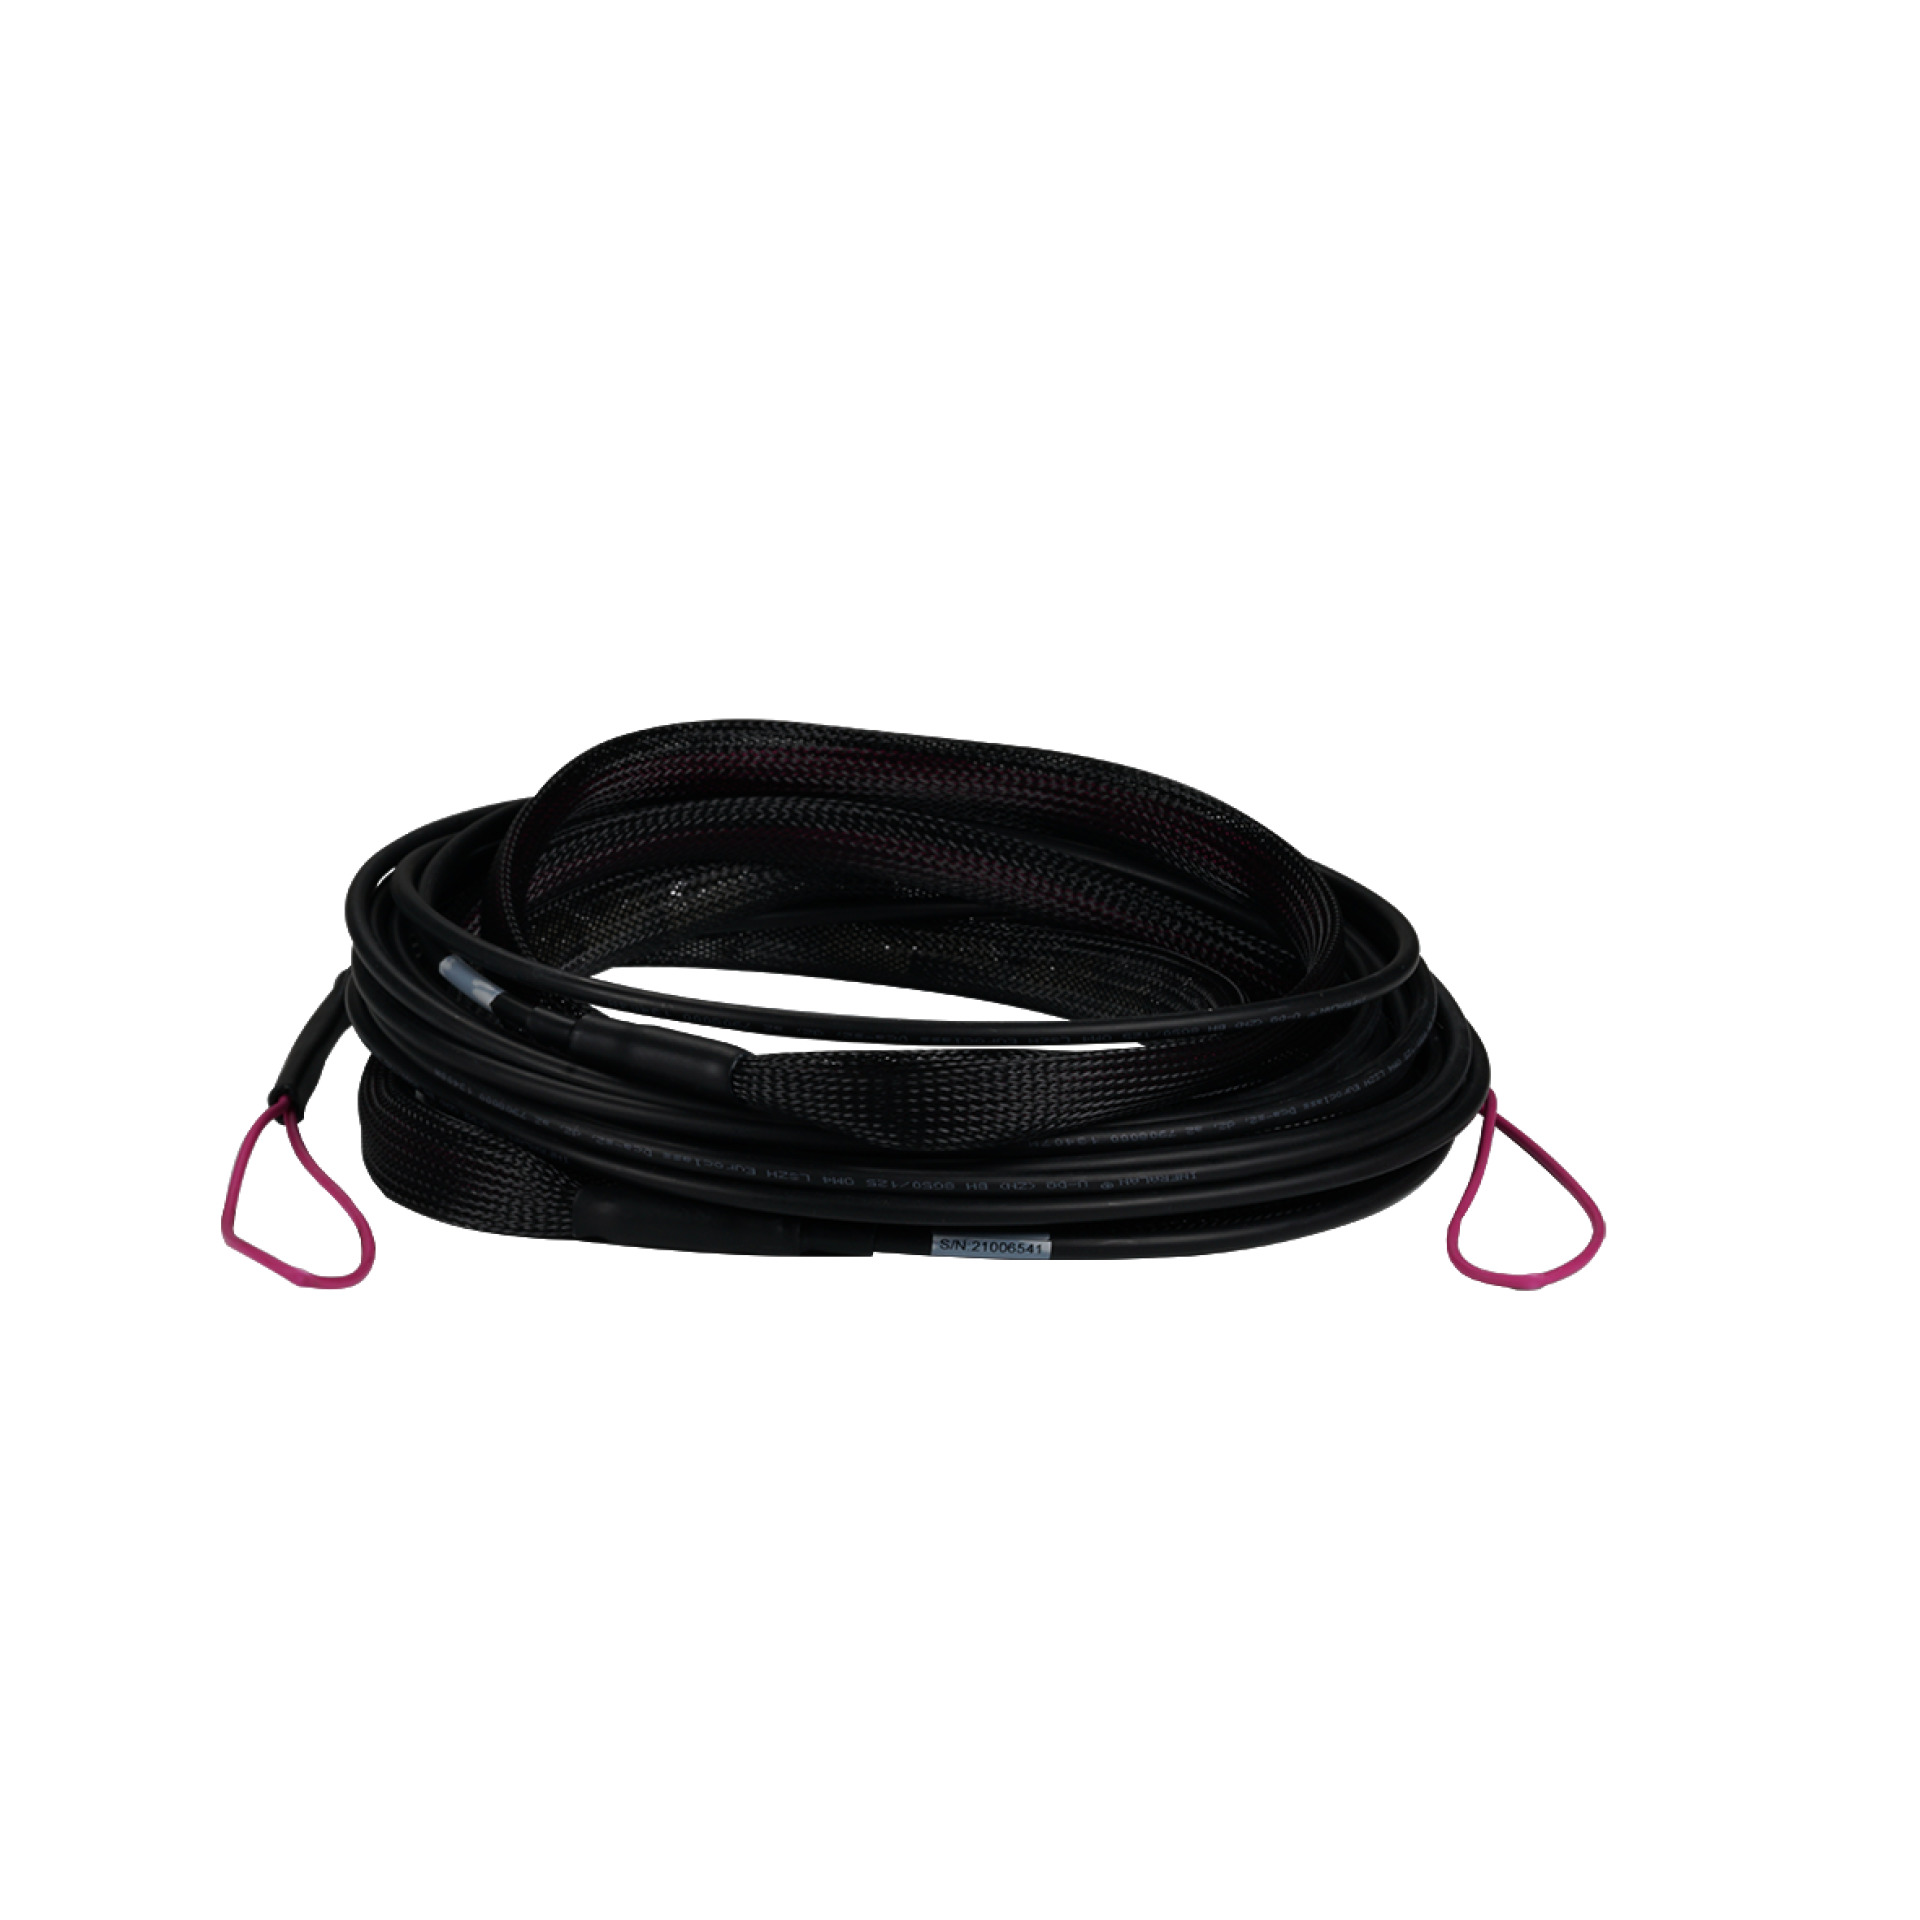 Trunk cable U-DQ(ZN)BH 4G 50/125, SC/SC OM4 140m